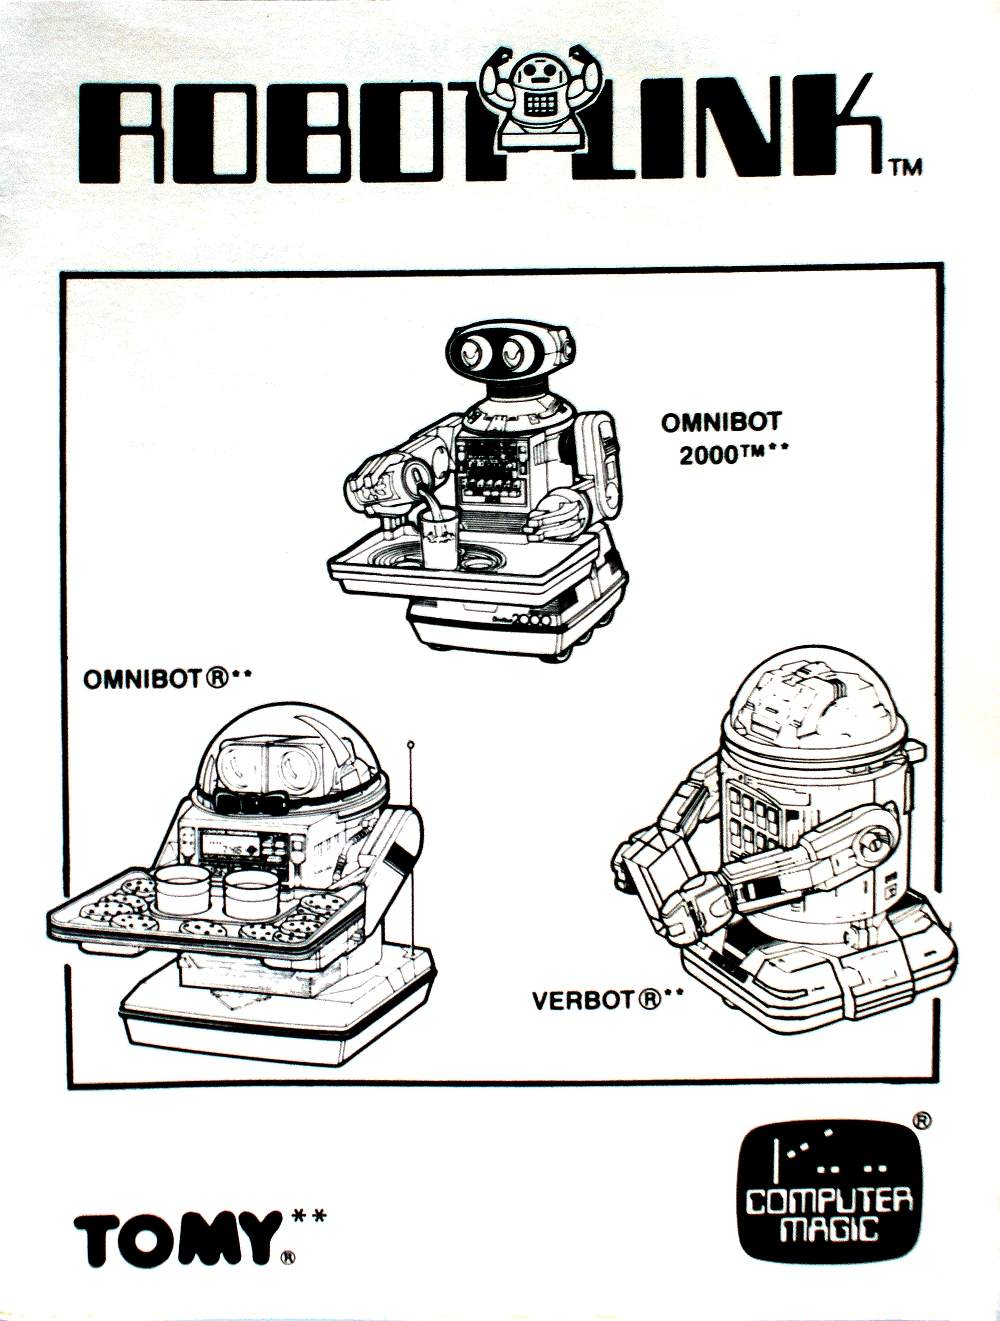 Tomy Omnibot 2000 - 5405 - The Old Robots Web Site